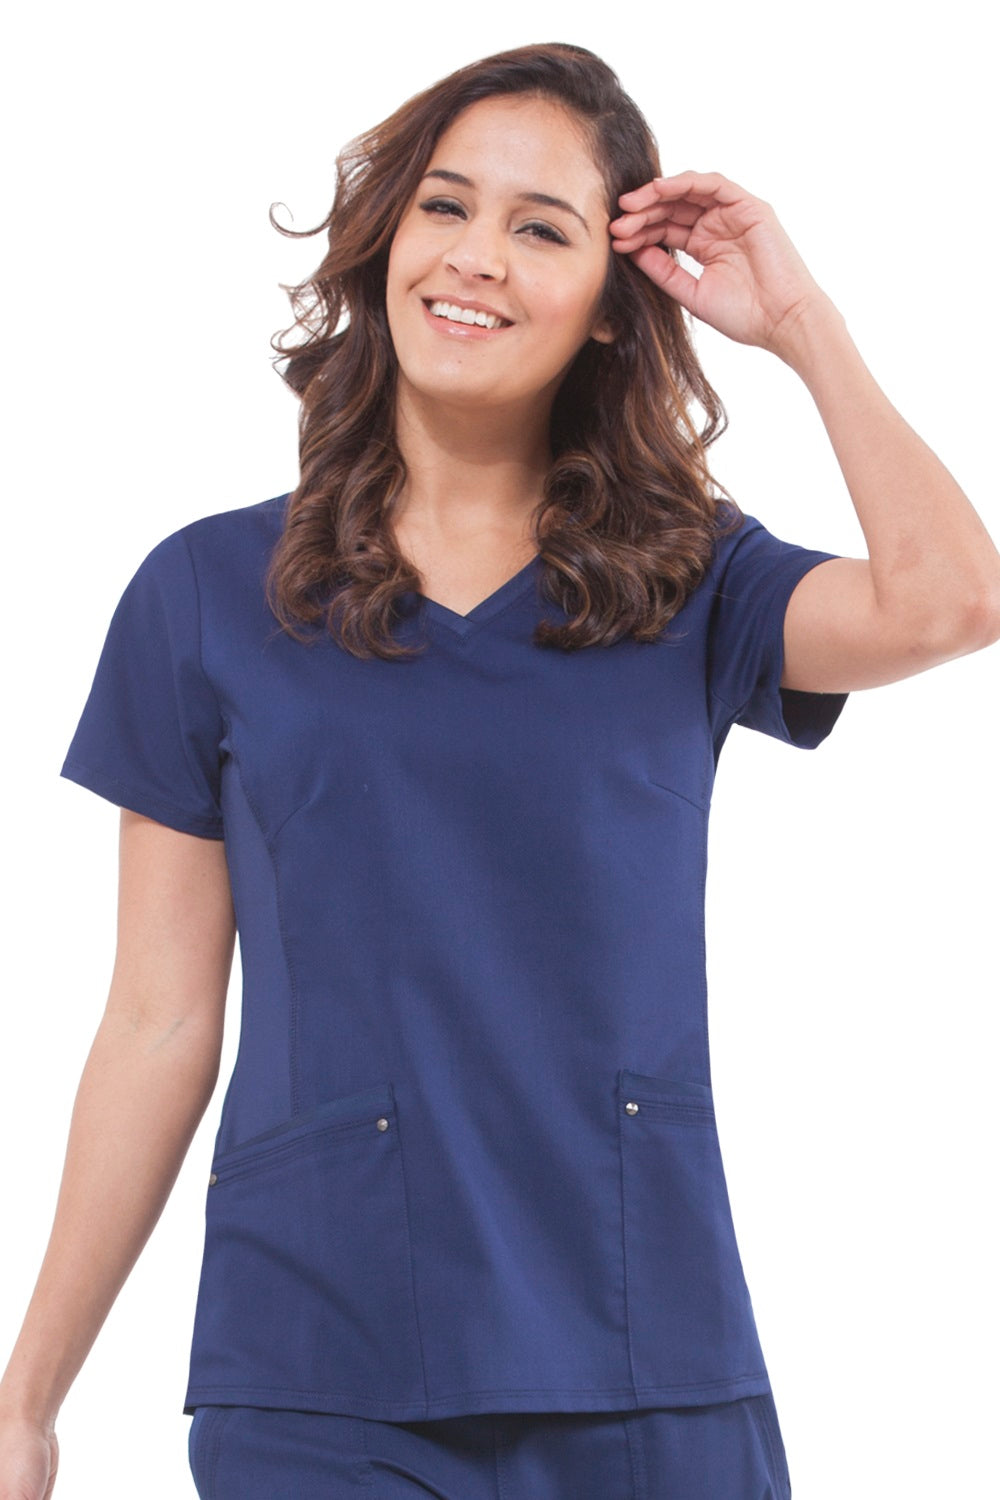 Healing Hands Purple Label Juliet Scrub Top in Navy at Parker's Clothing and Shoes.